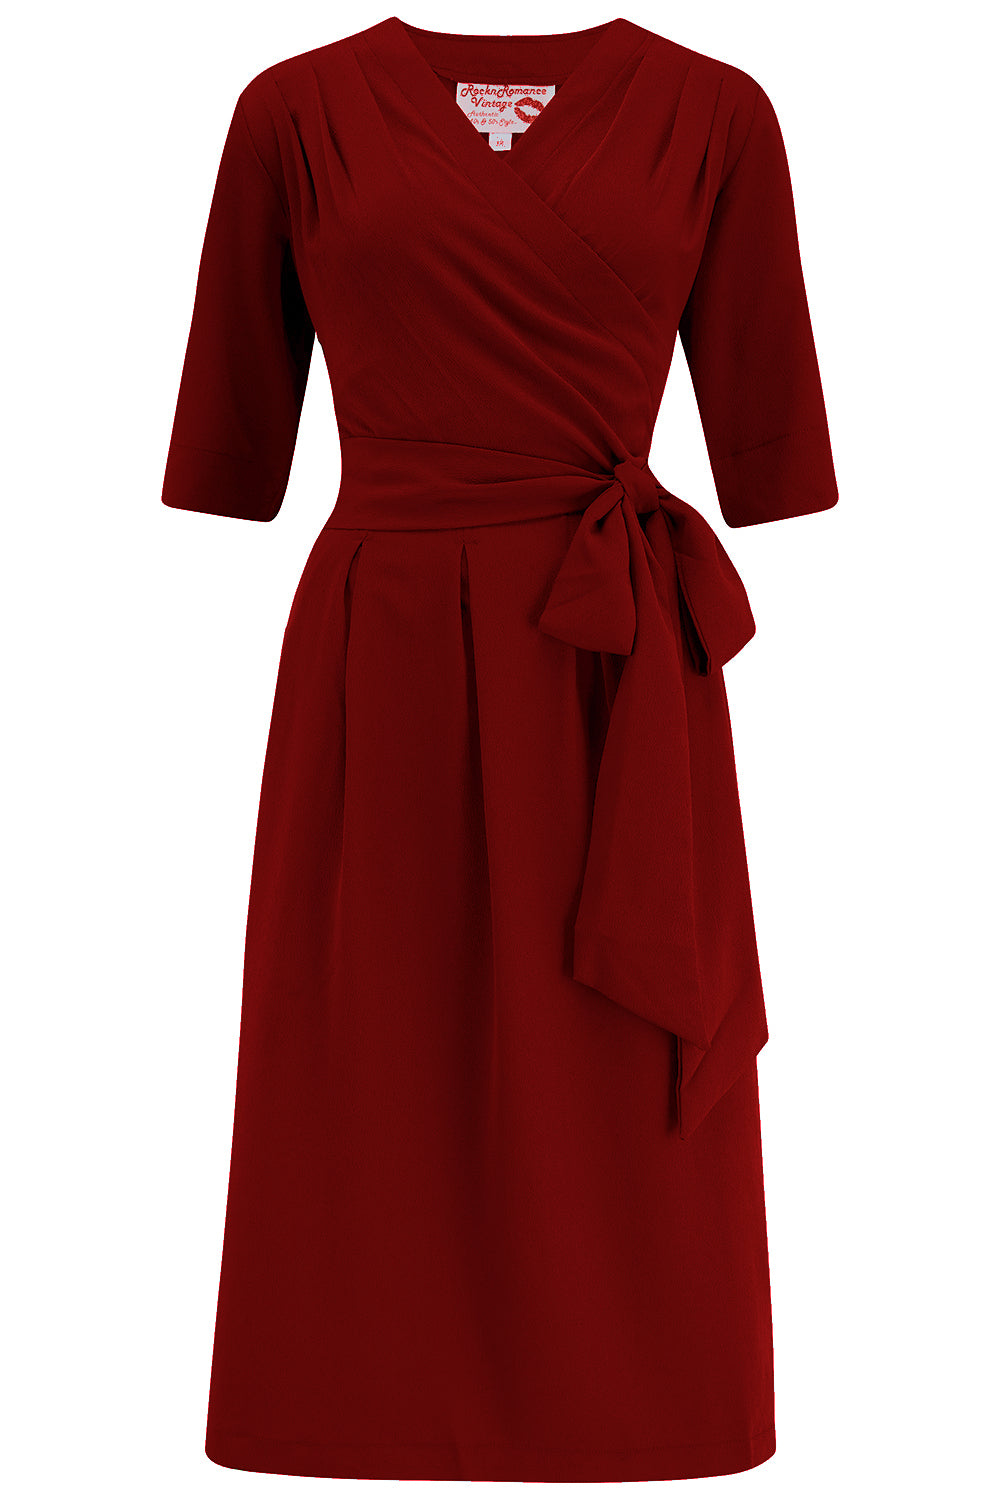 Ten 1950s Dress Styles | Vintage 50s Dresses The Vivien Full Wrap Dress in Wine True 1940s To Early 1950s Style £49.95 AT vintagedancer.com